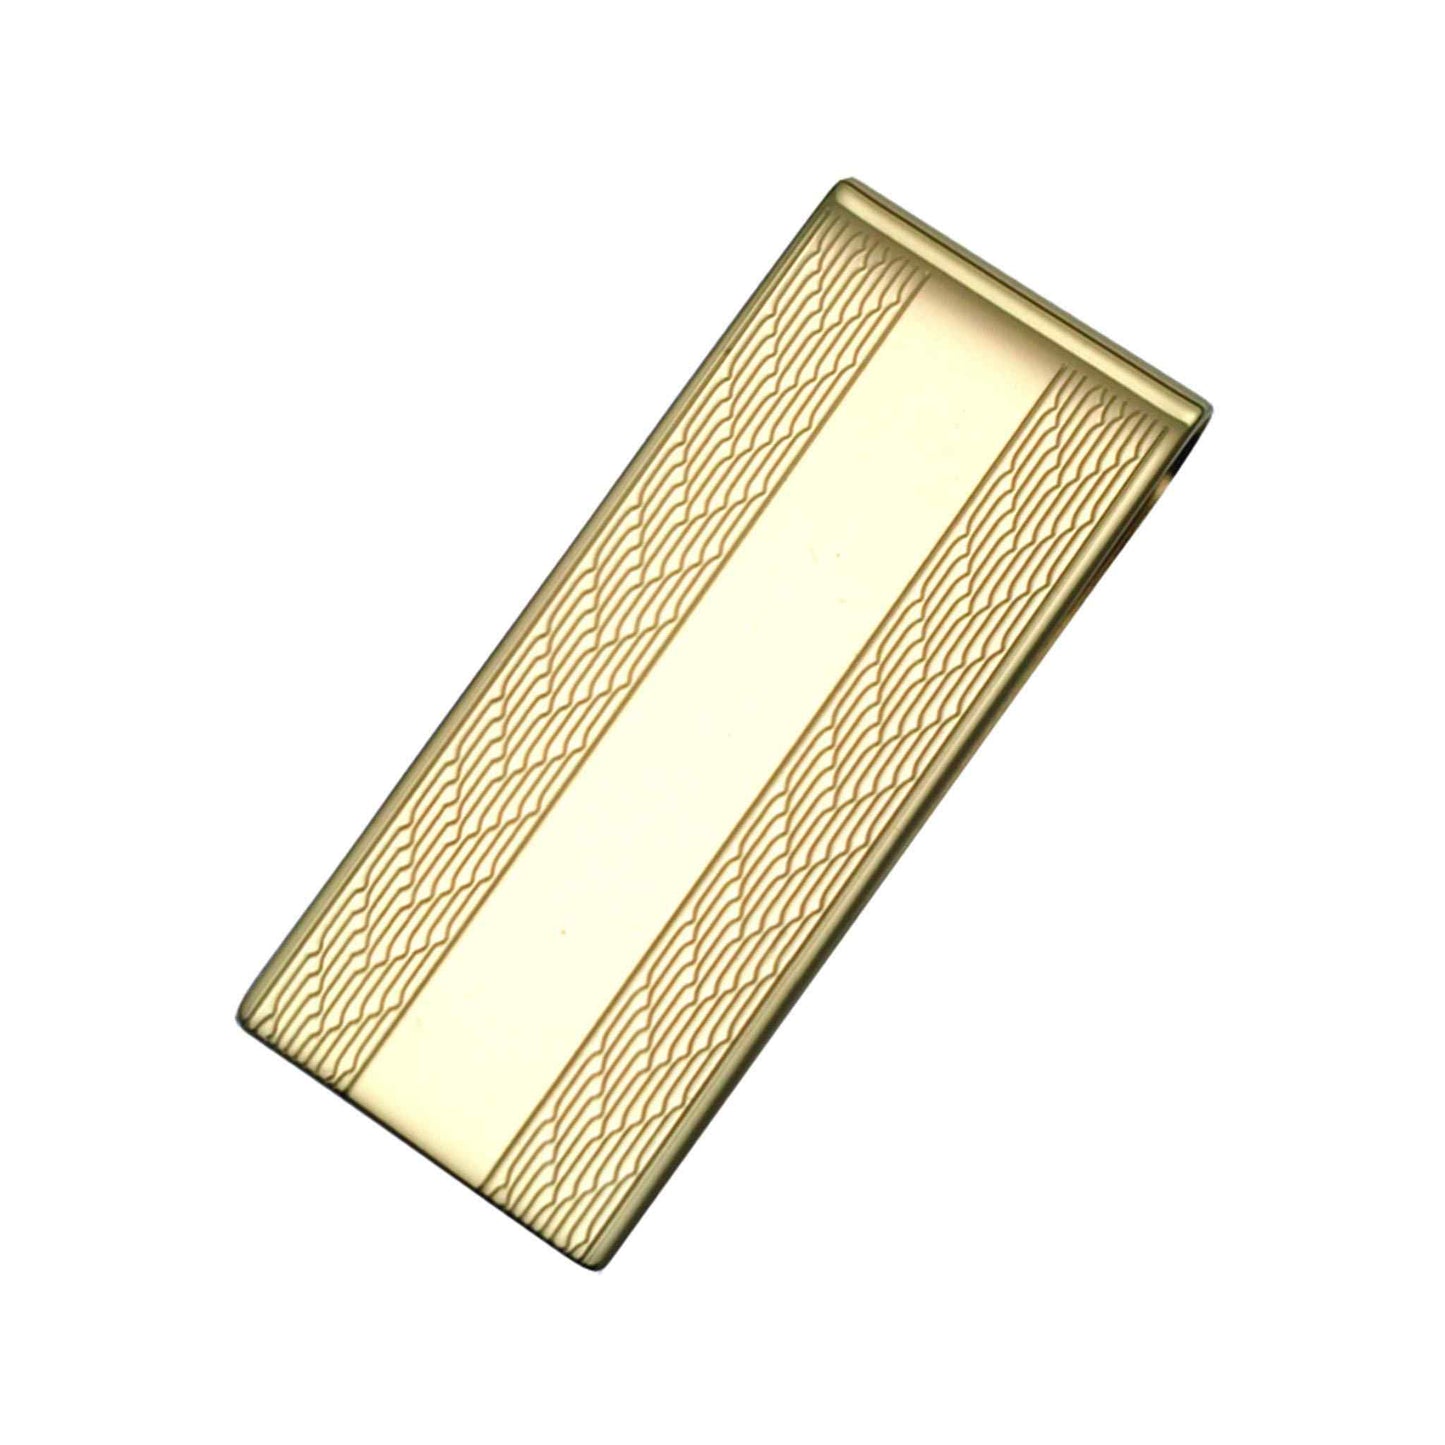 A 14k yellow gold etched herringbone 3/4" money clip displayed on a neutral white background.